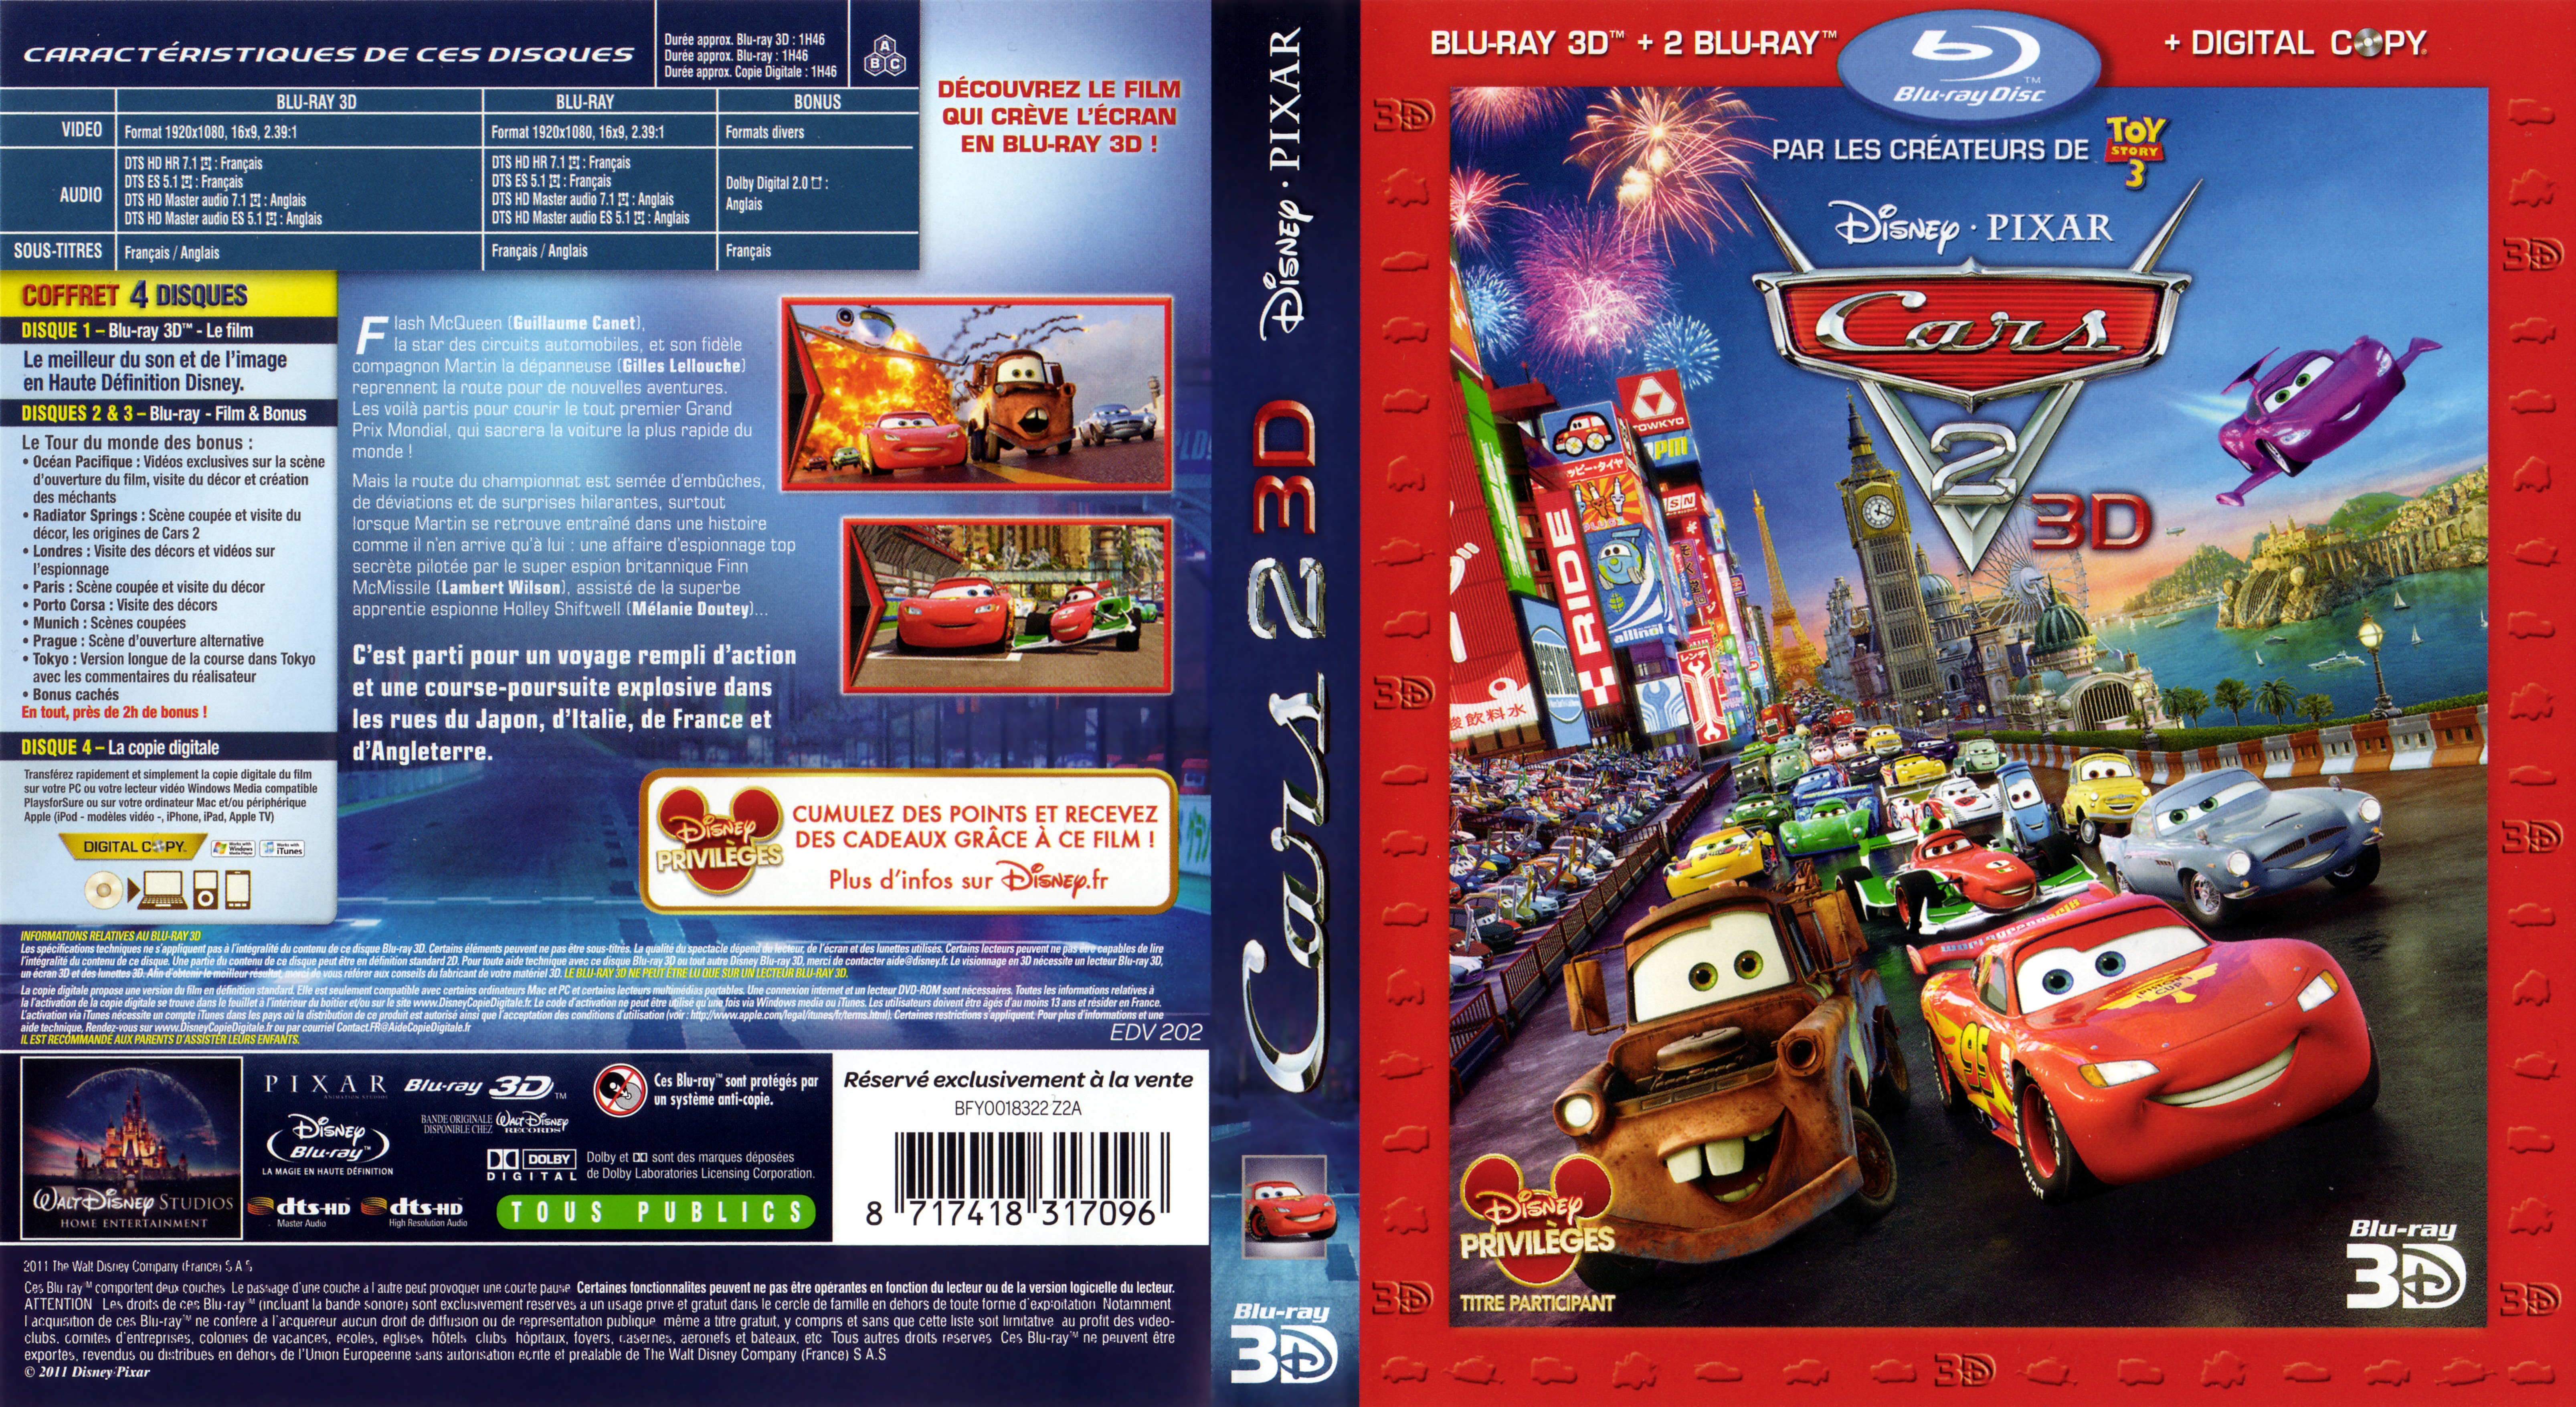 Jaquette DVD Cars 2 3D (BLU-RAY)